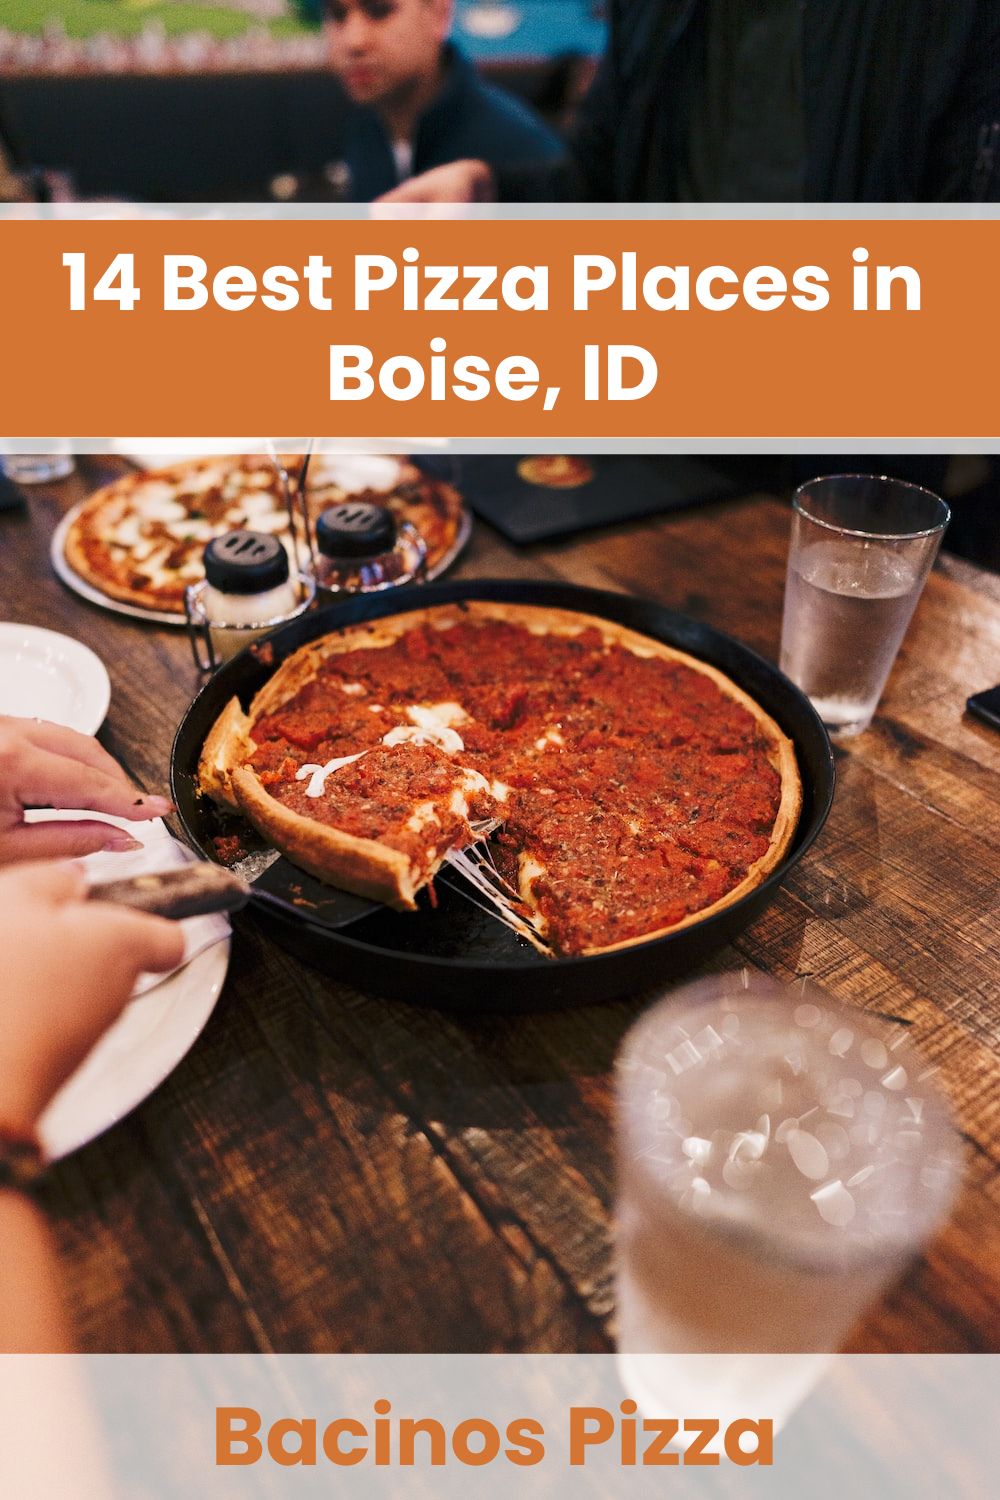 Best Pizza Places in Boise